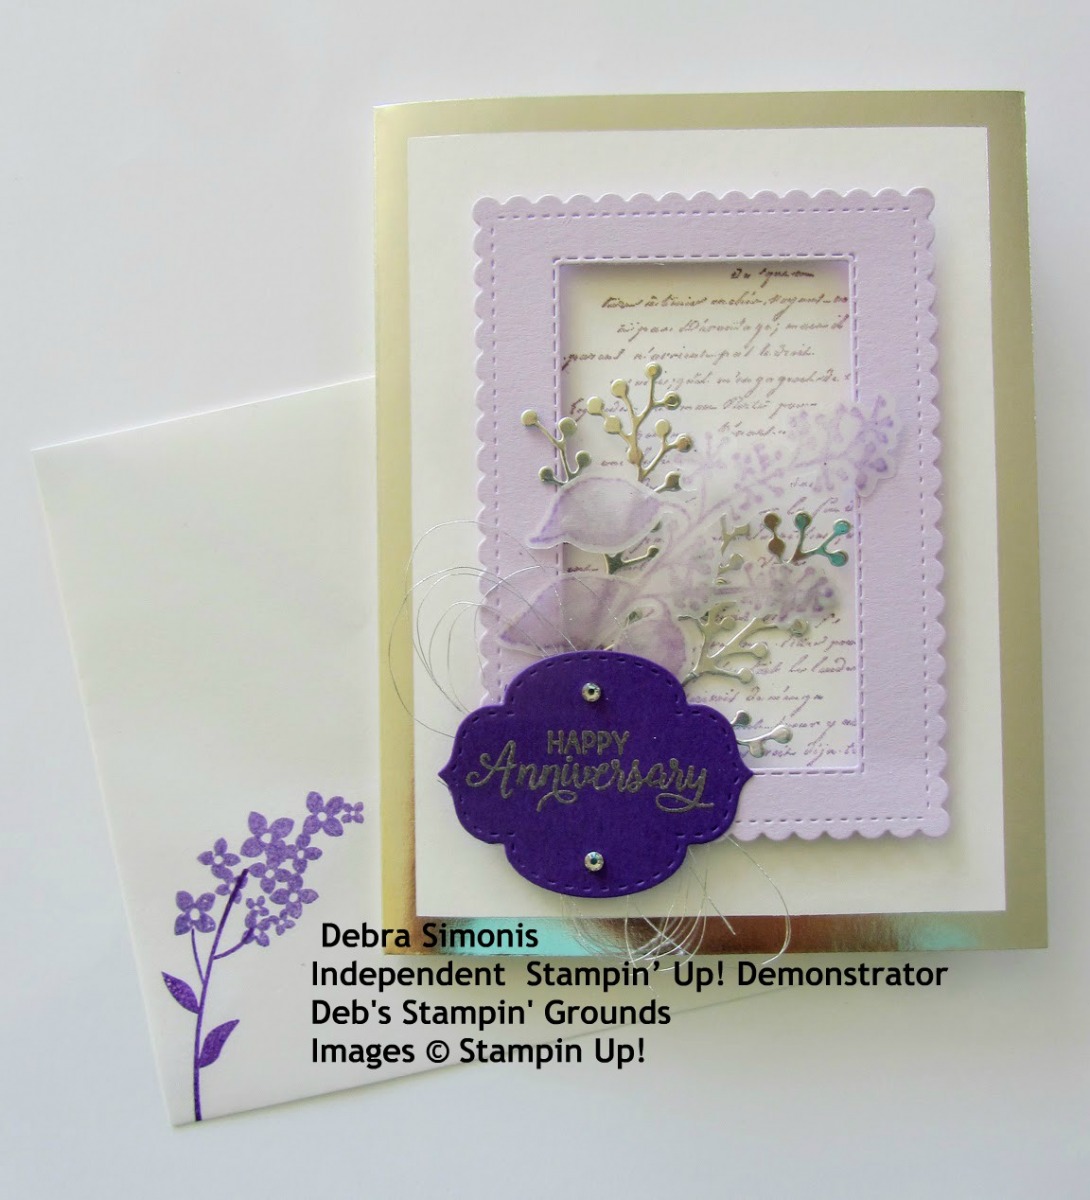 Stampin-Up-Beautiful-Bouquet-Very-Versailles-First-Frost-Stitched-So-Sweetly-Dies-Frosted-Bouquet-Dies-Heat-Embossing-Happy-Anniversary-Card-inside-view-Debra-Simonis-Stampinup